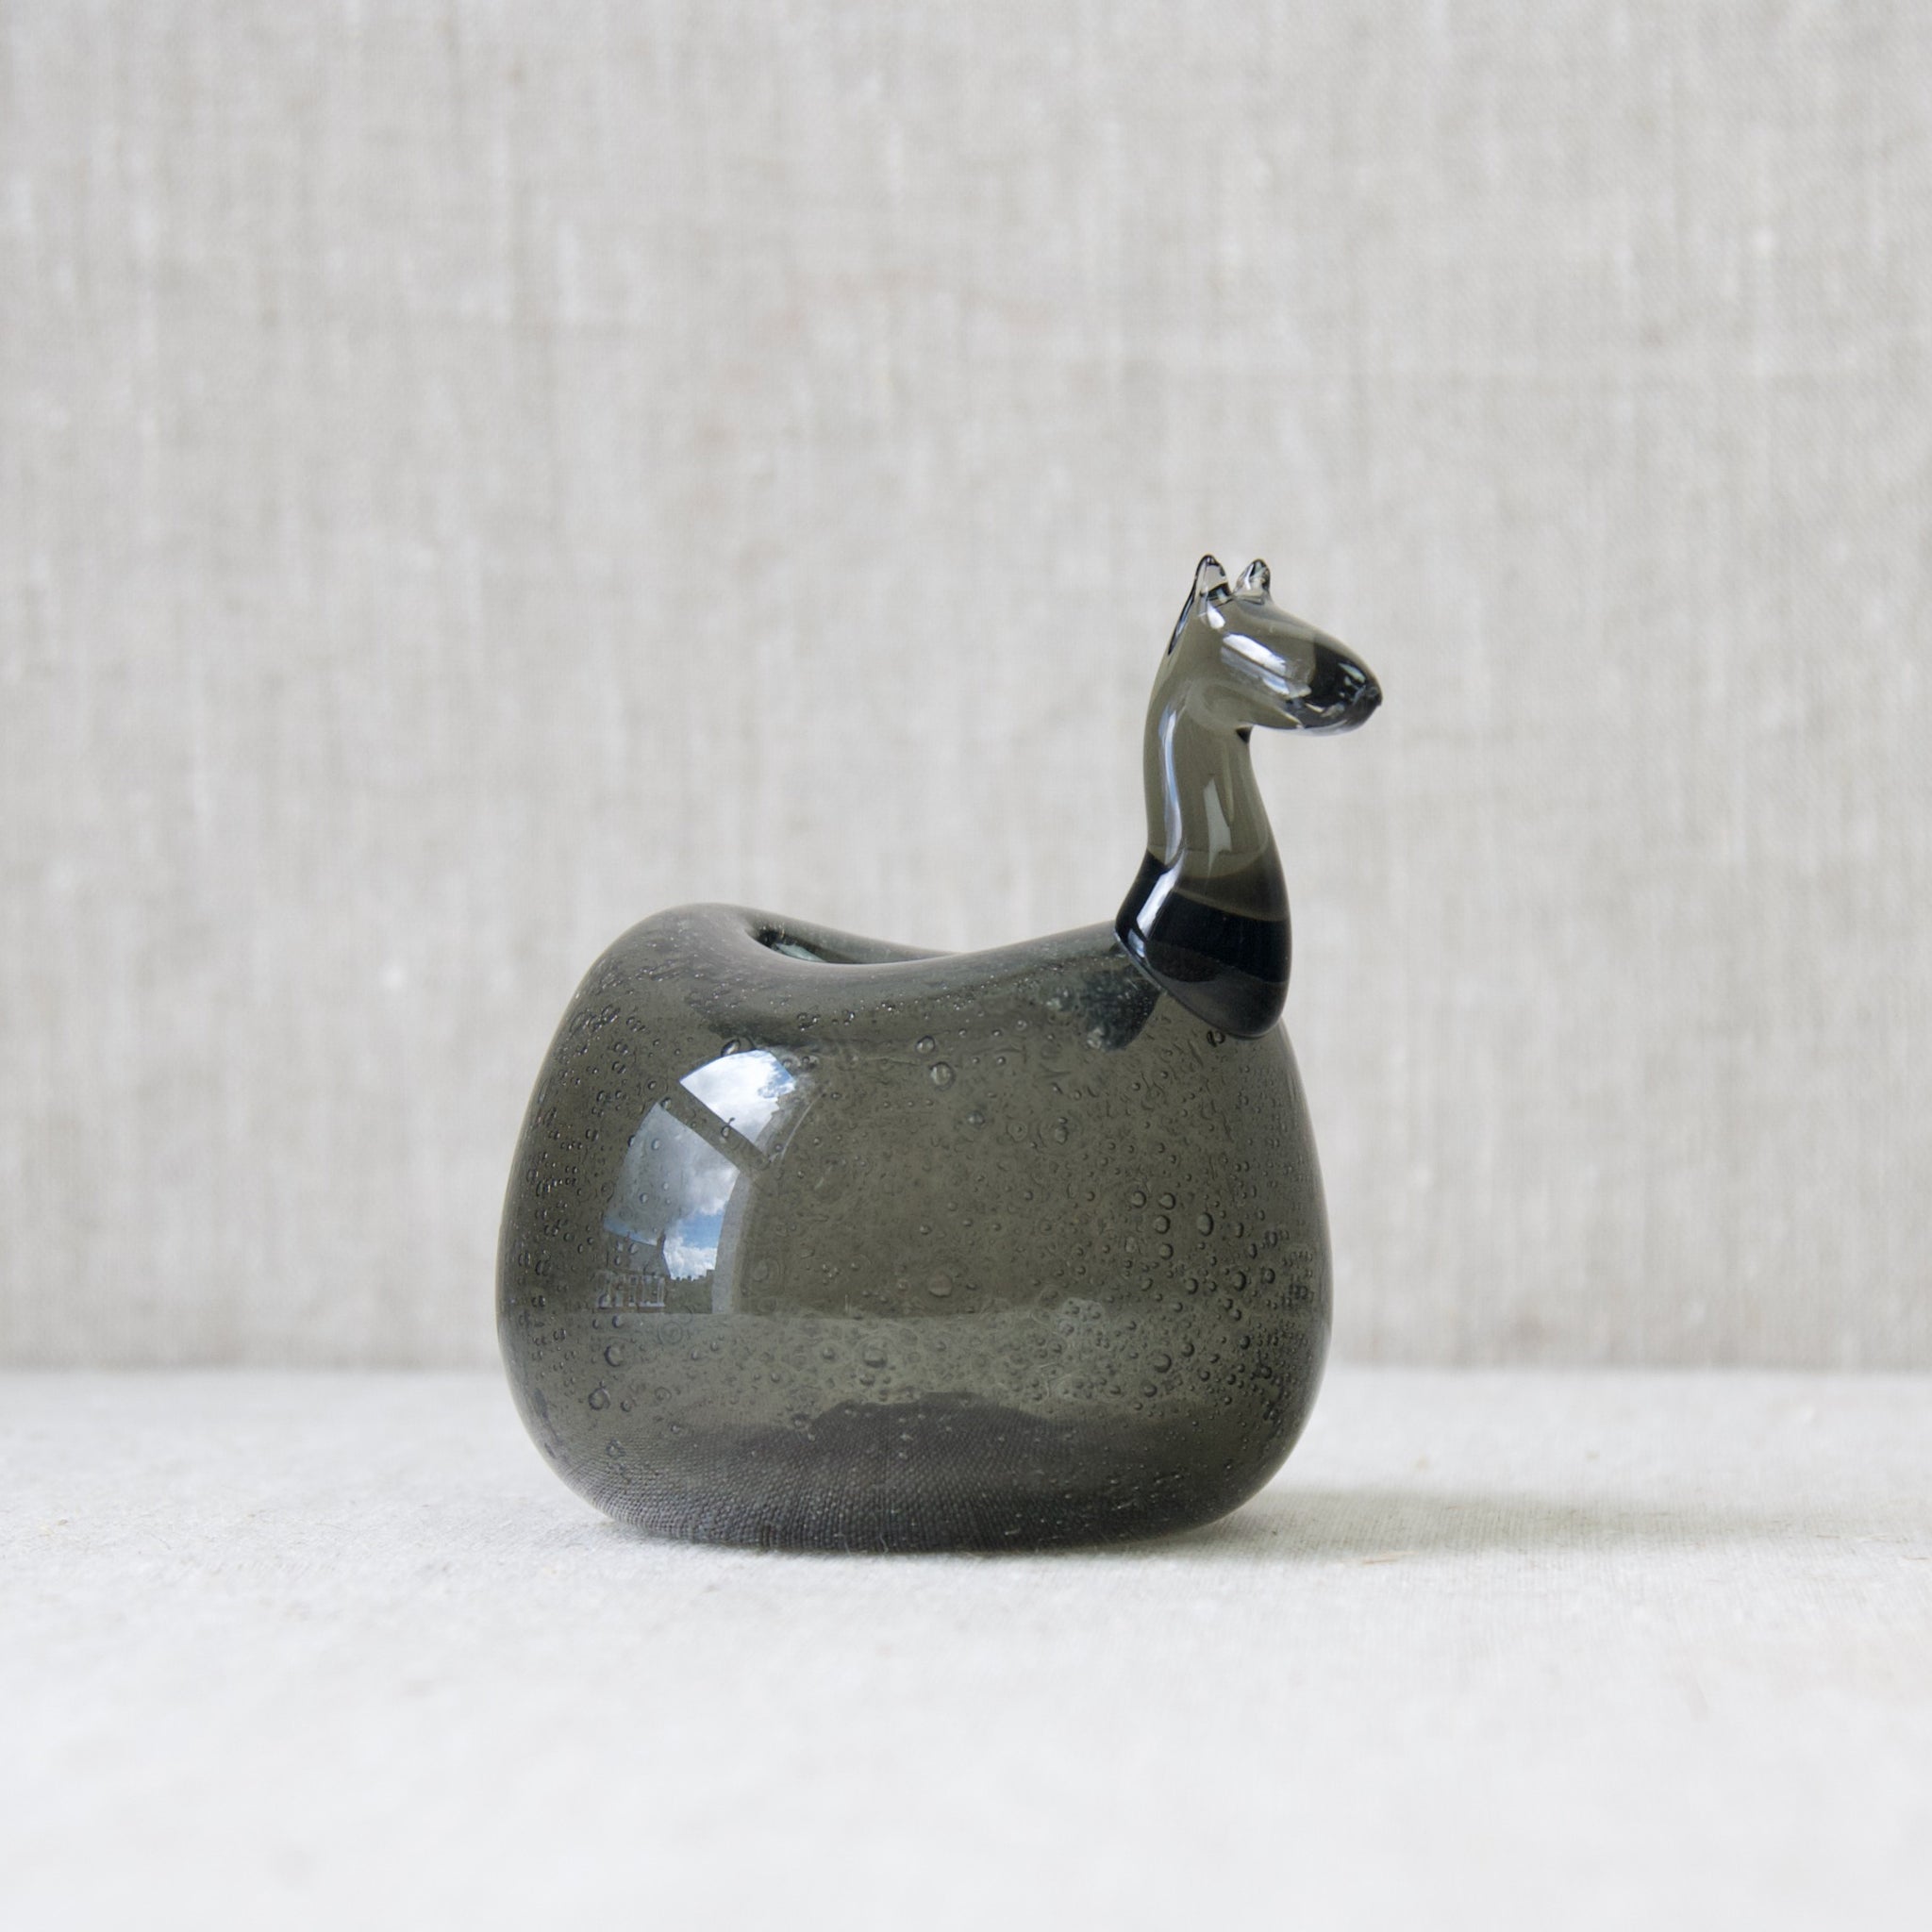 Modernist Swedish glass "Pegasus" moneybox or piggy bank designed by Goran Warff in the form of a horse, Pukeberg, 1960s